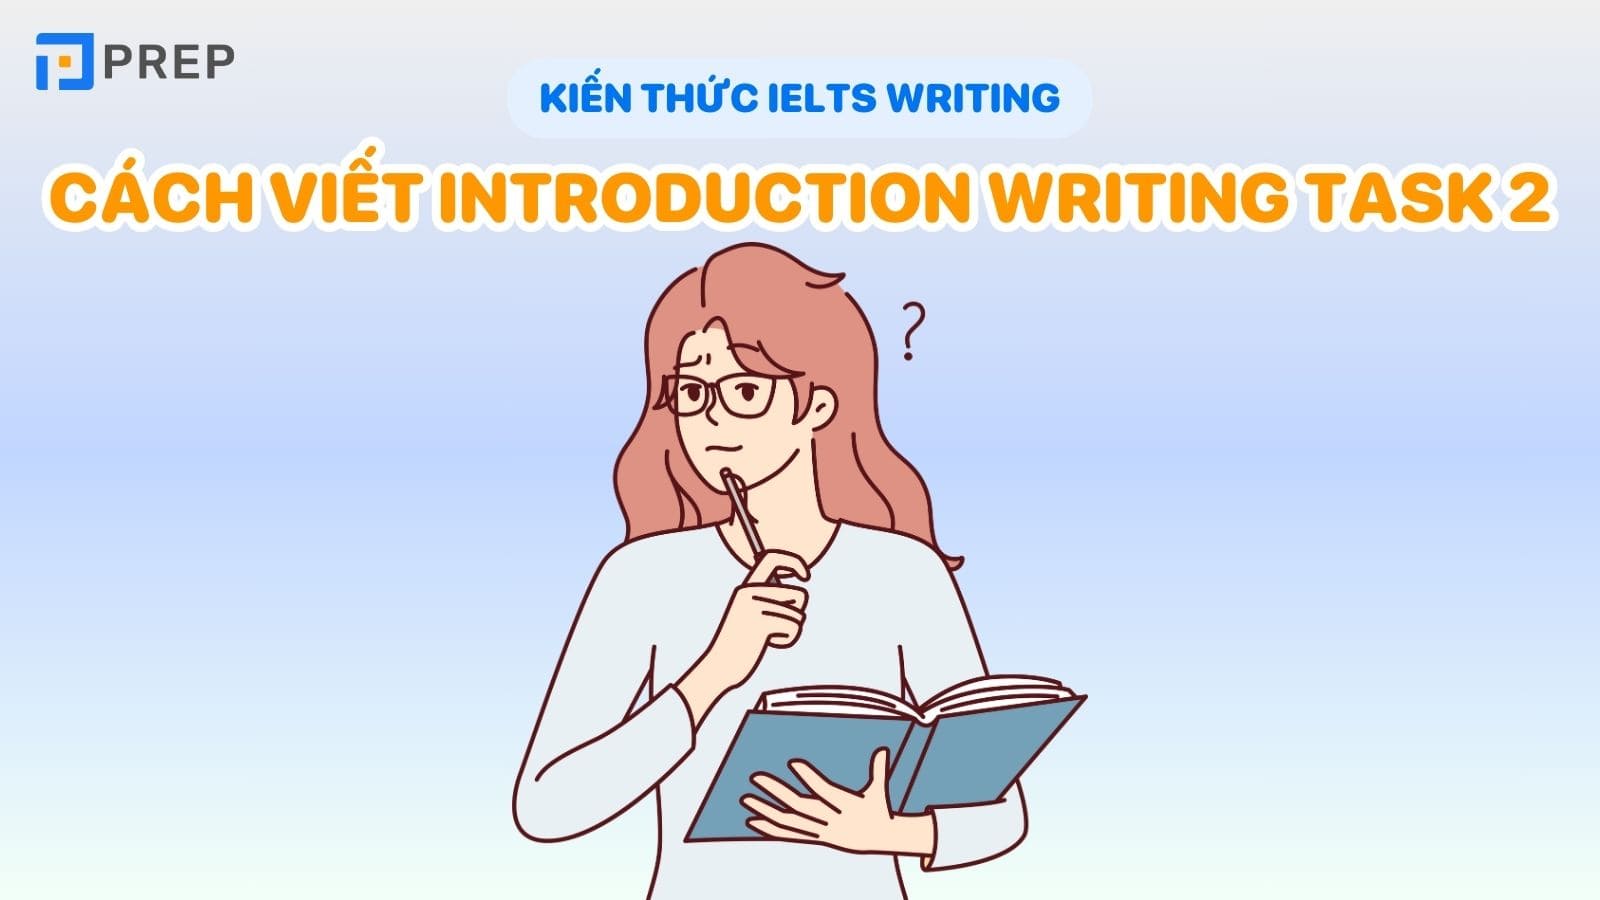 cach-viet-introduction-writing-task-2.jpg